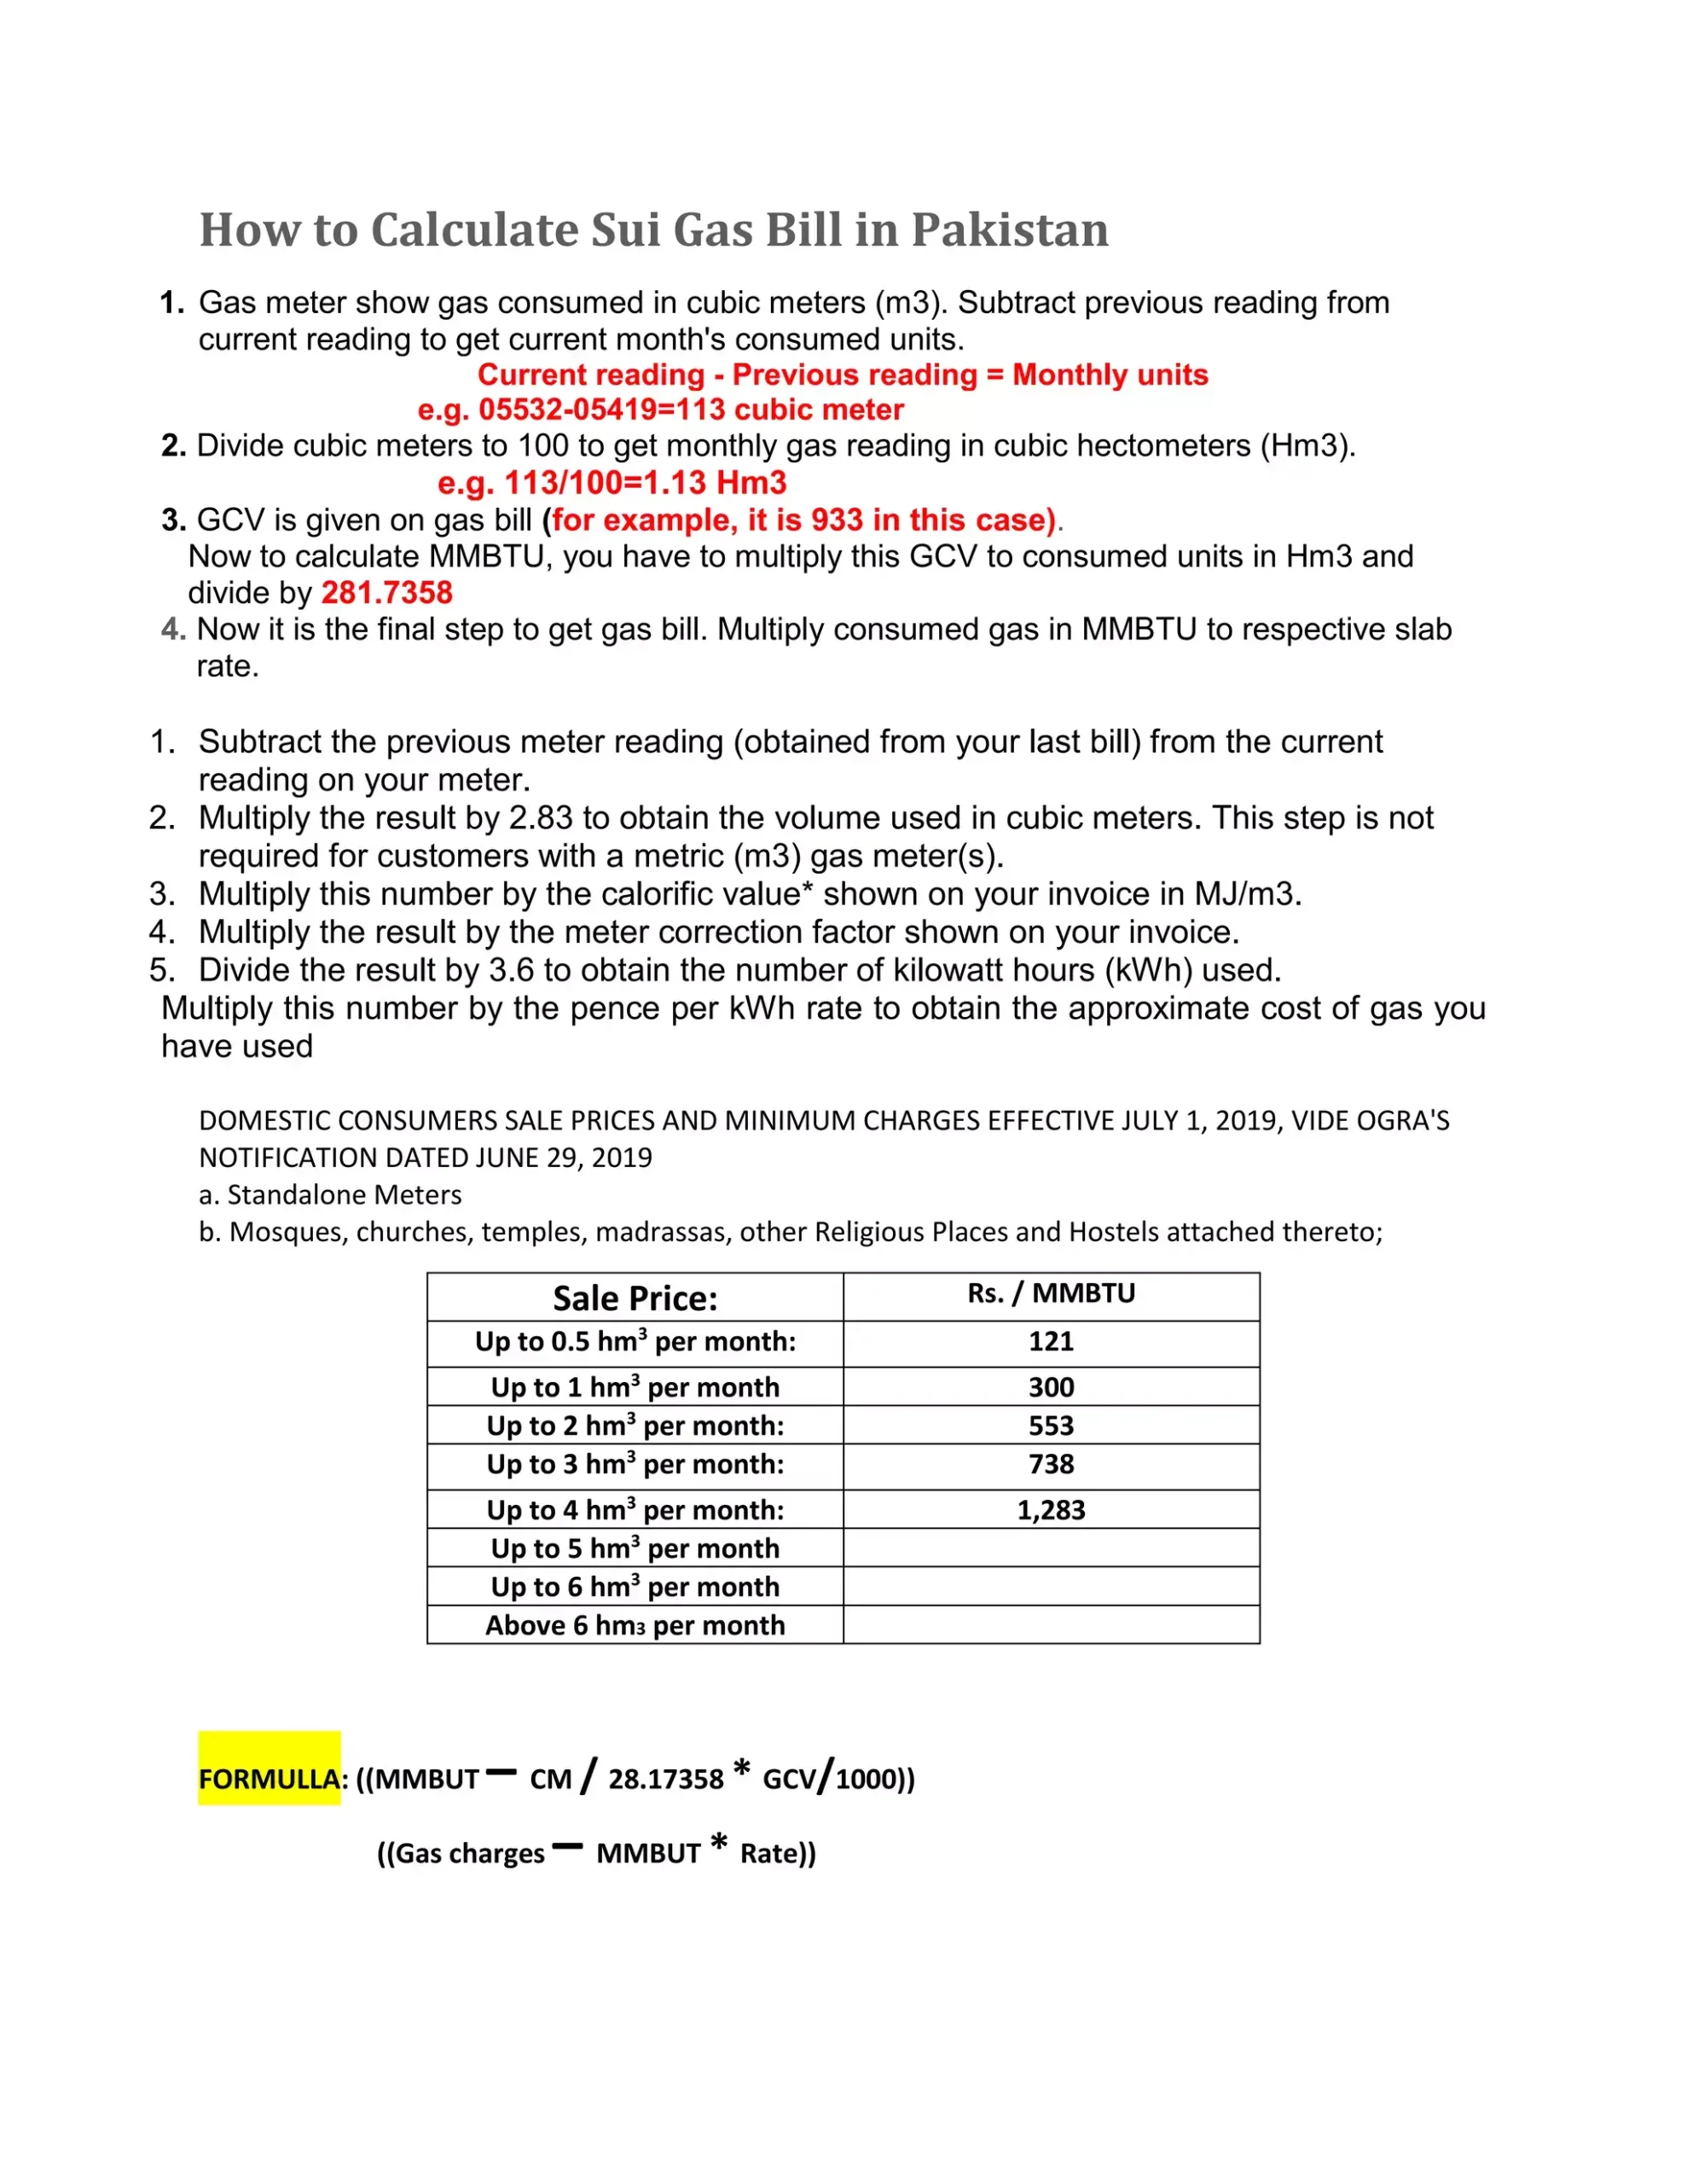 How-to-calculate-sui-gas-bill-in-pakistan